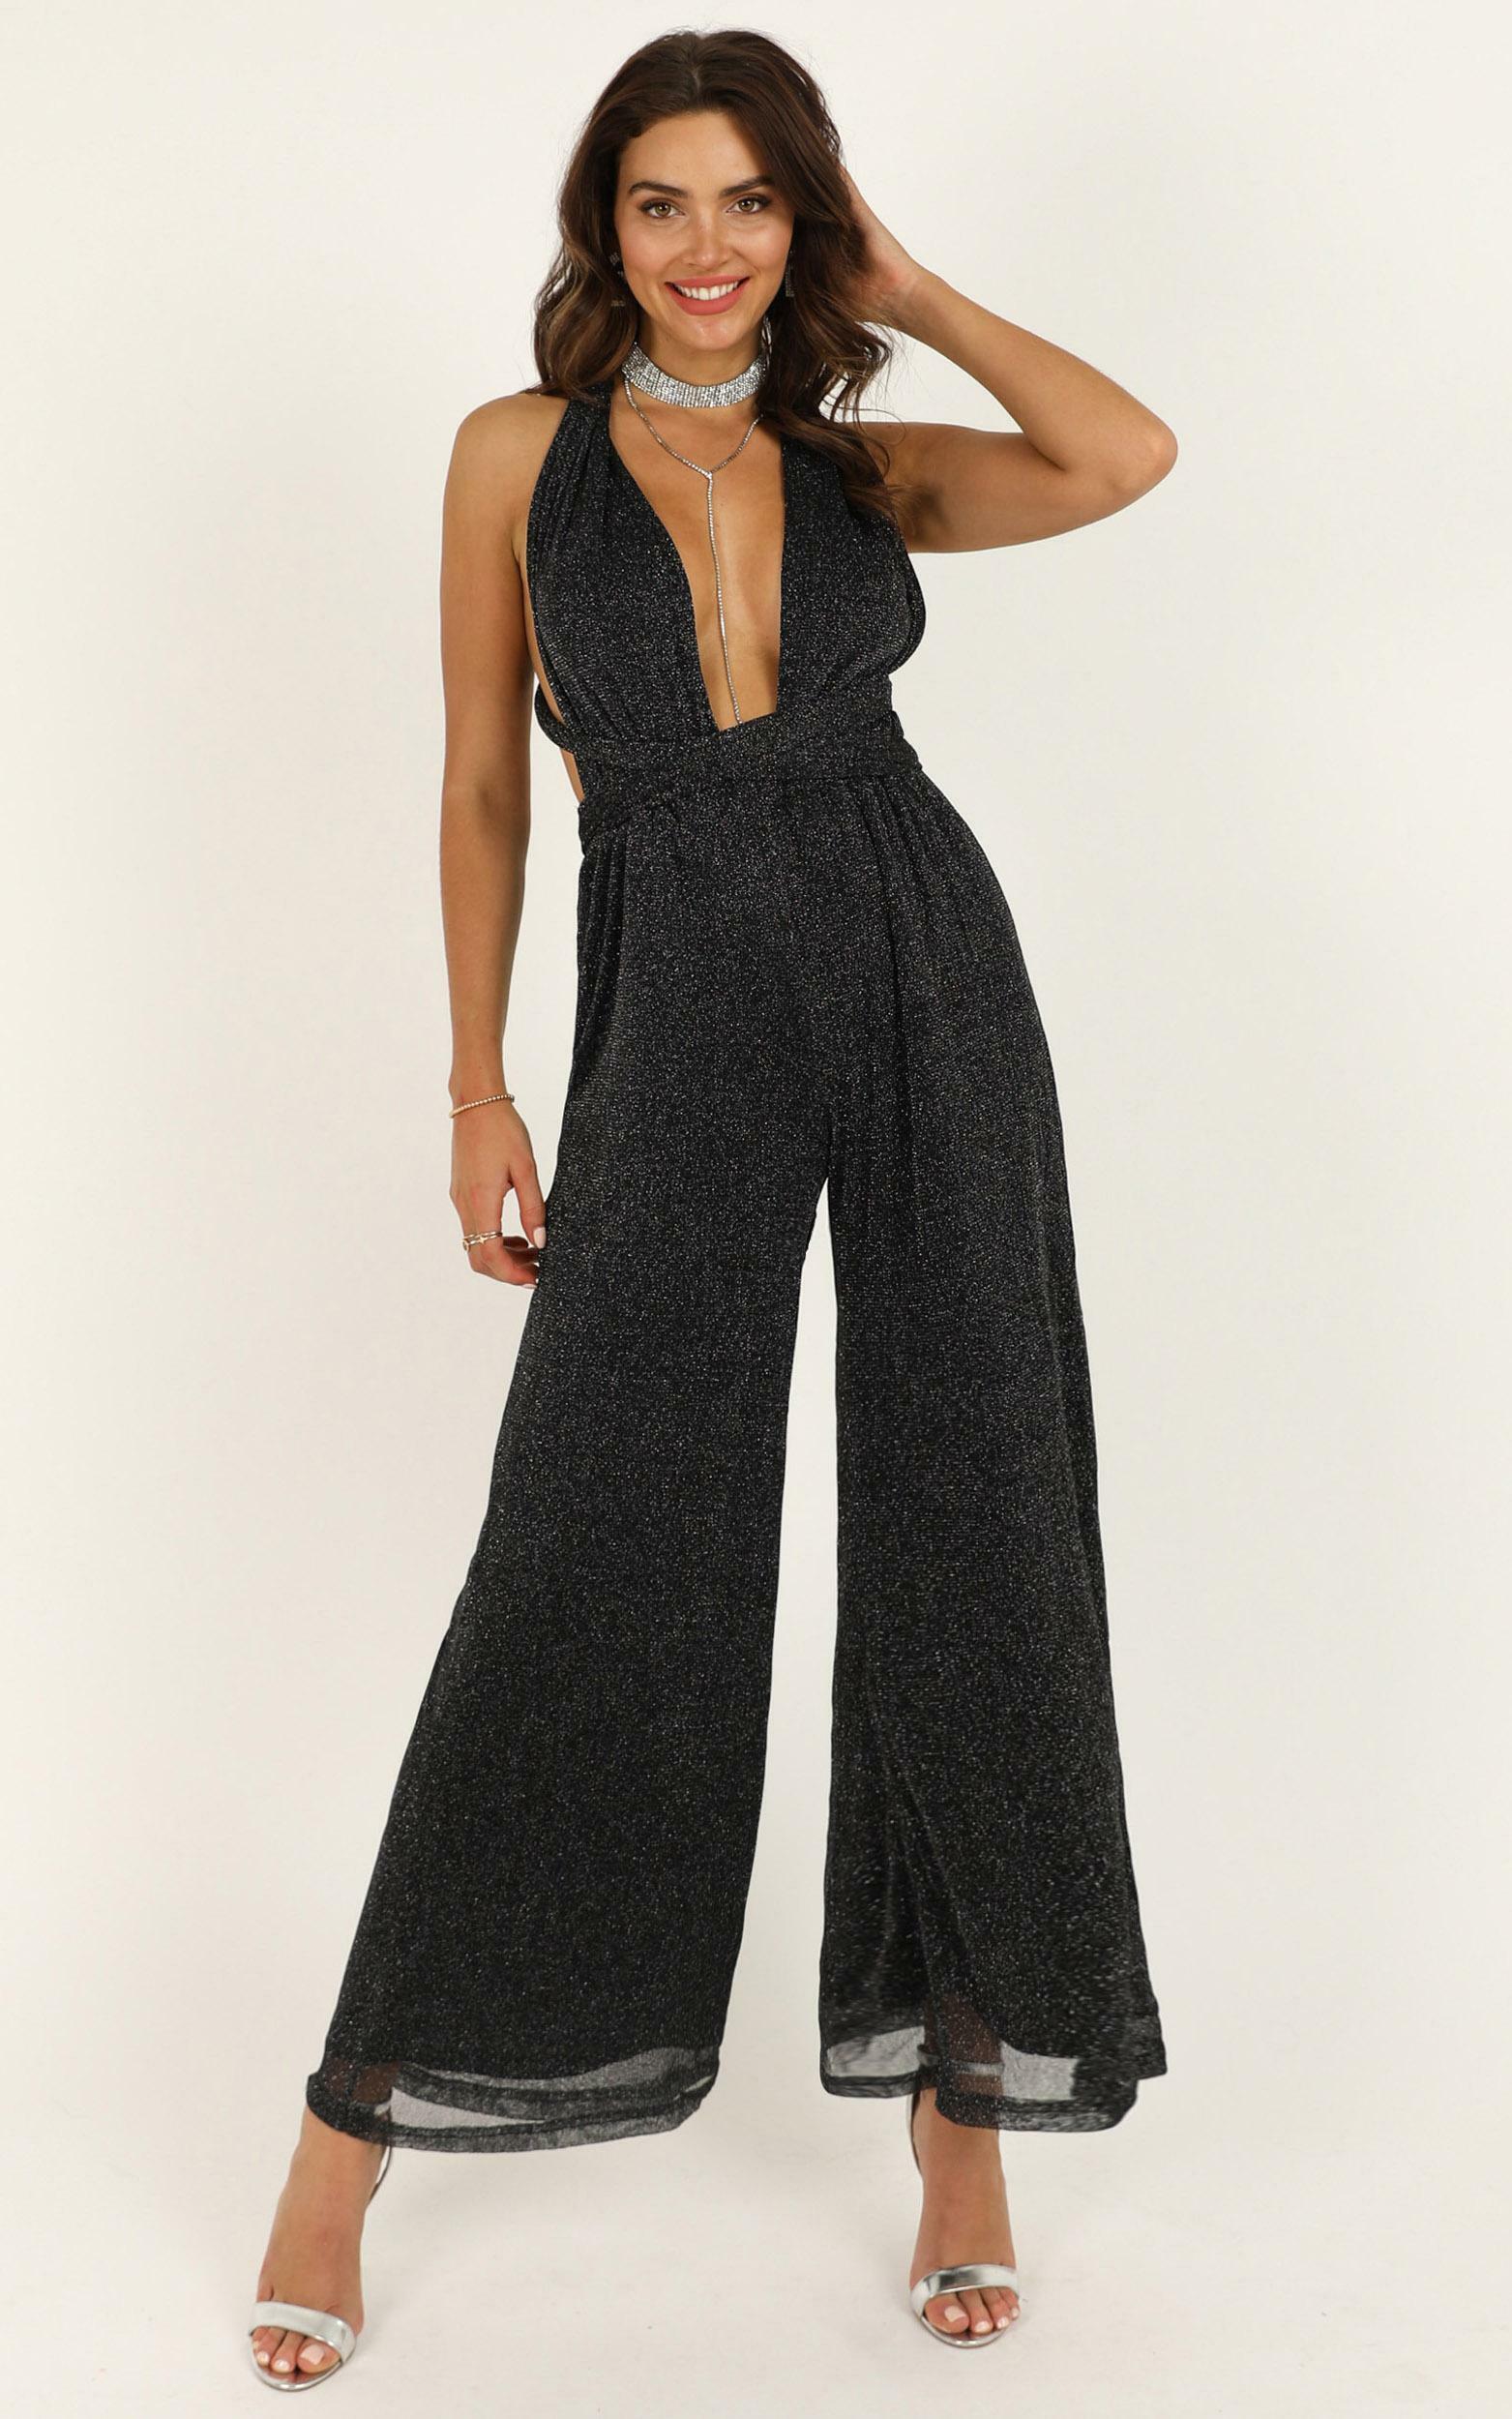 Stand Up For Me Jumpsuit In Black Lurex | Showpo USA